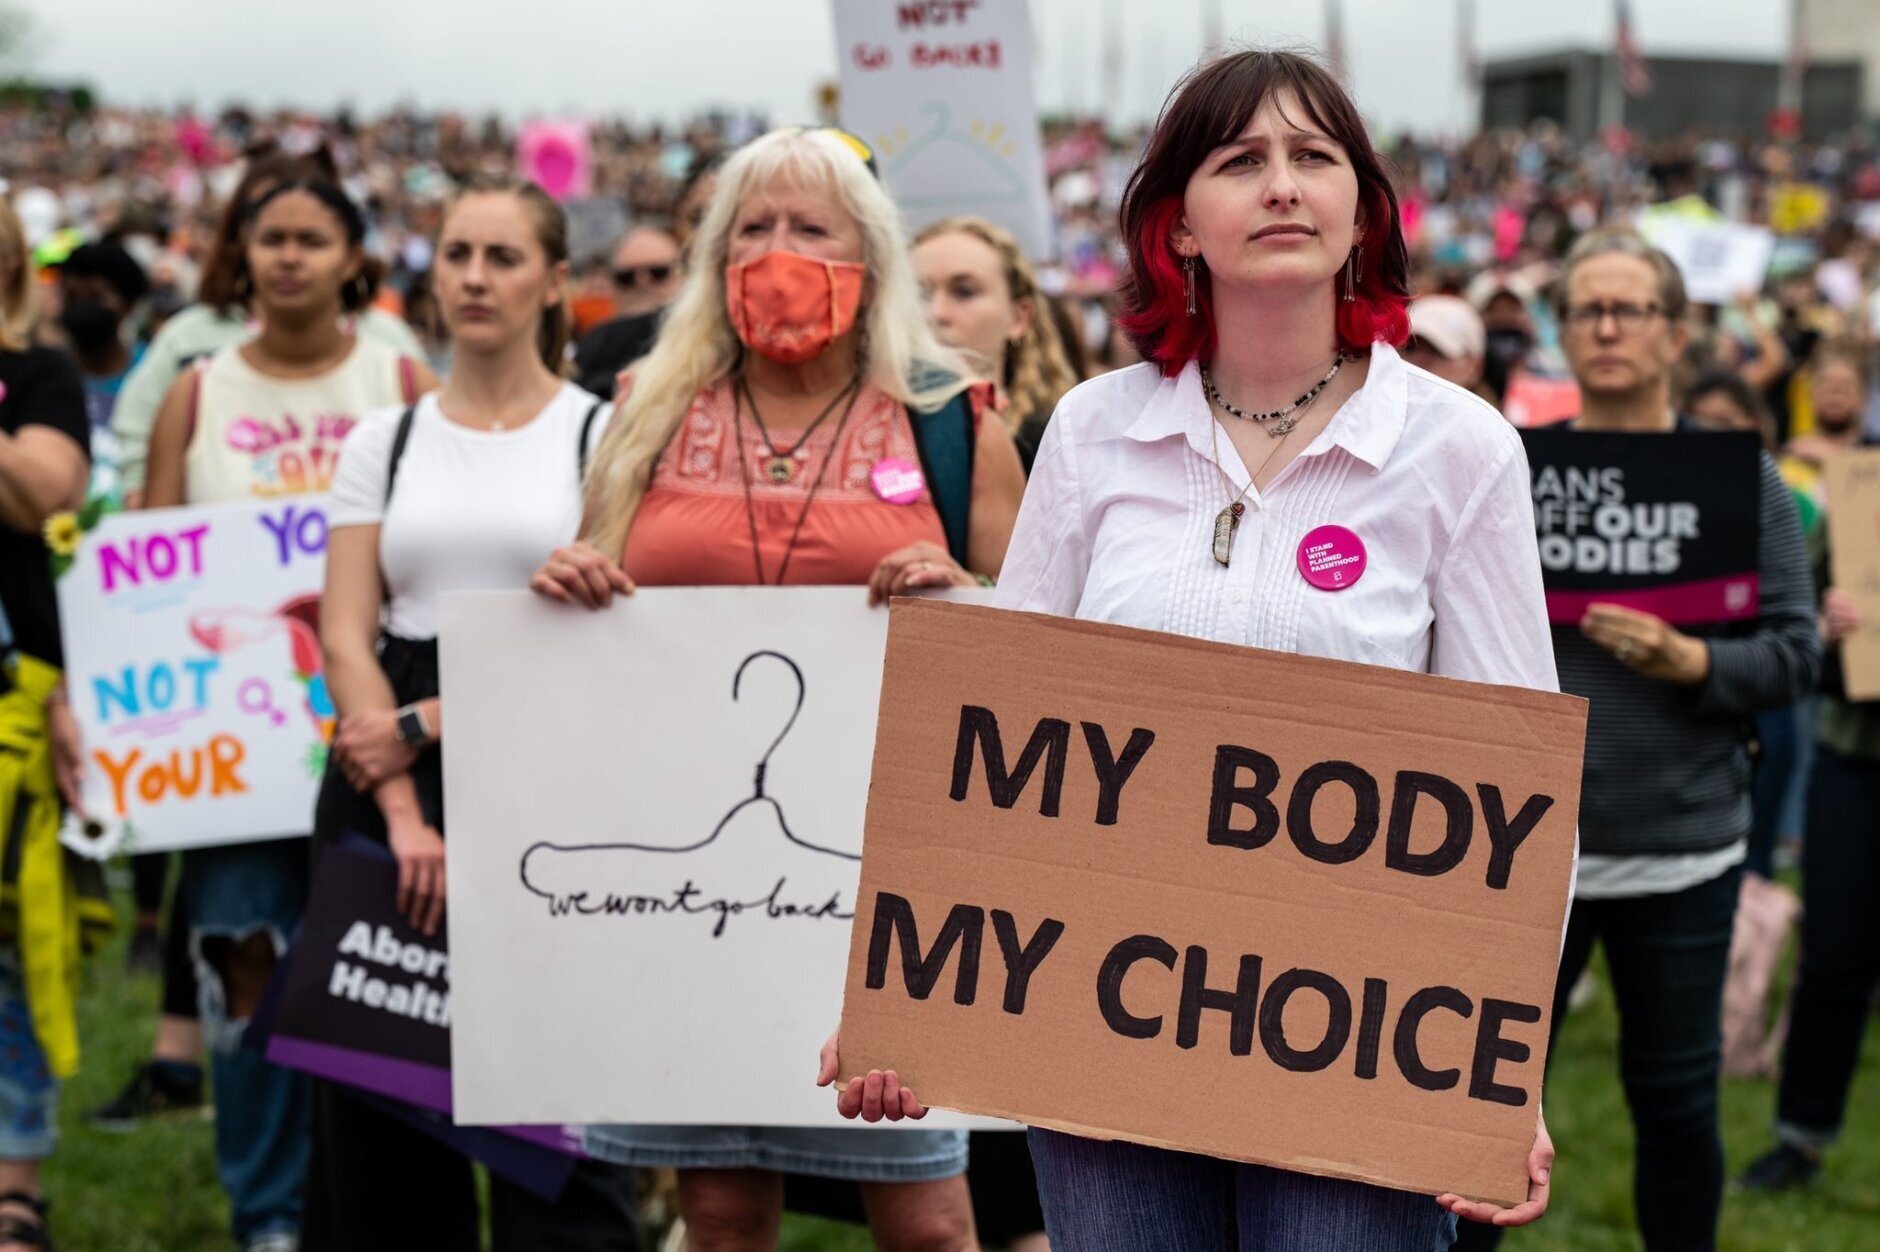 <p>Marchers chanted “Abortion is healthcare” and held signs that said “My body, my choice,” “Bans off our bodies,” “Support bodily autonomy,” and more, as an all-female drum corp played amongst the demonstrators. (WTOP/Alejandro Alvarez)</p>
